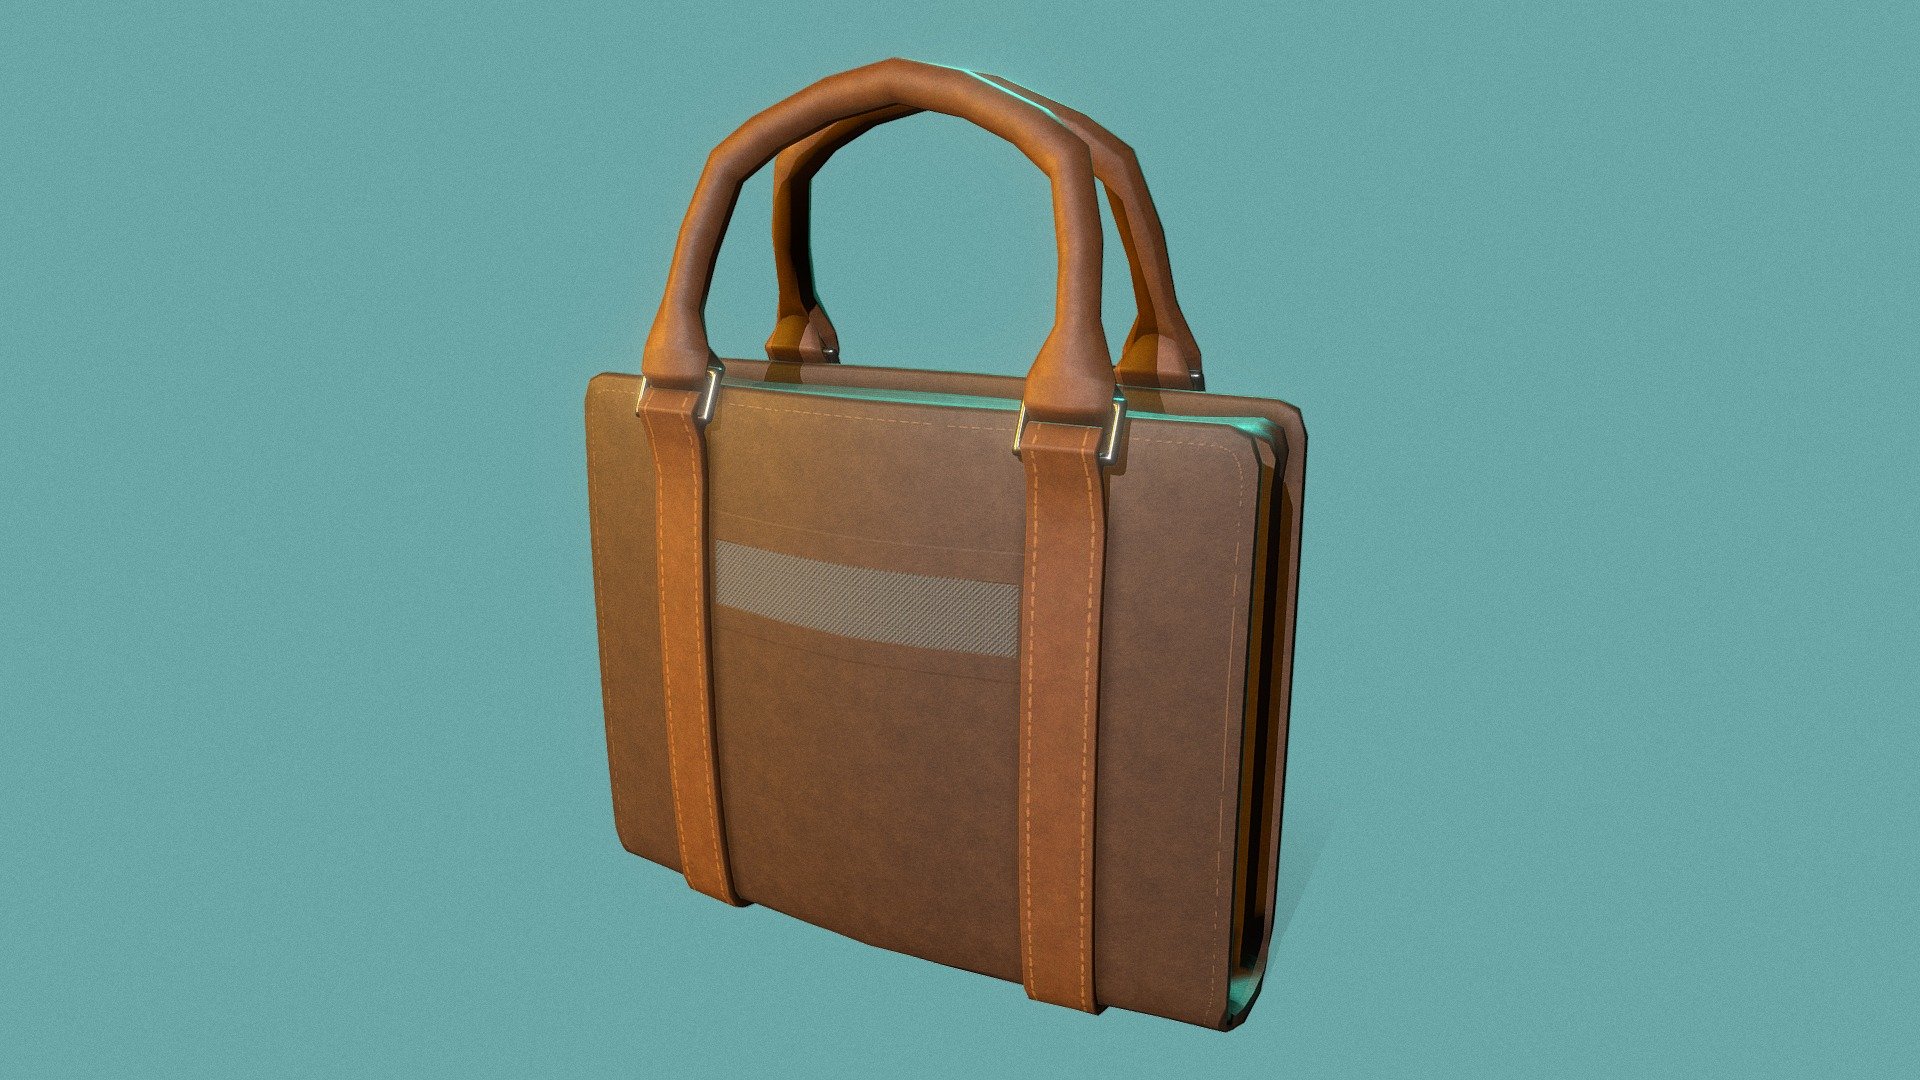 Well, 3D StylizeHand-Bag made by me. Refer to some pictures on Pinterest

Hope you quys like it! - Stylize Hand-Bag - 3D model by ctnhan97 3d model